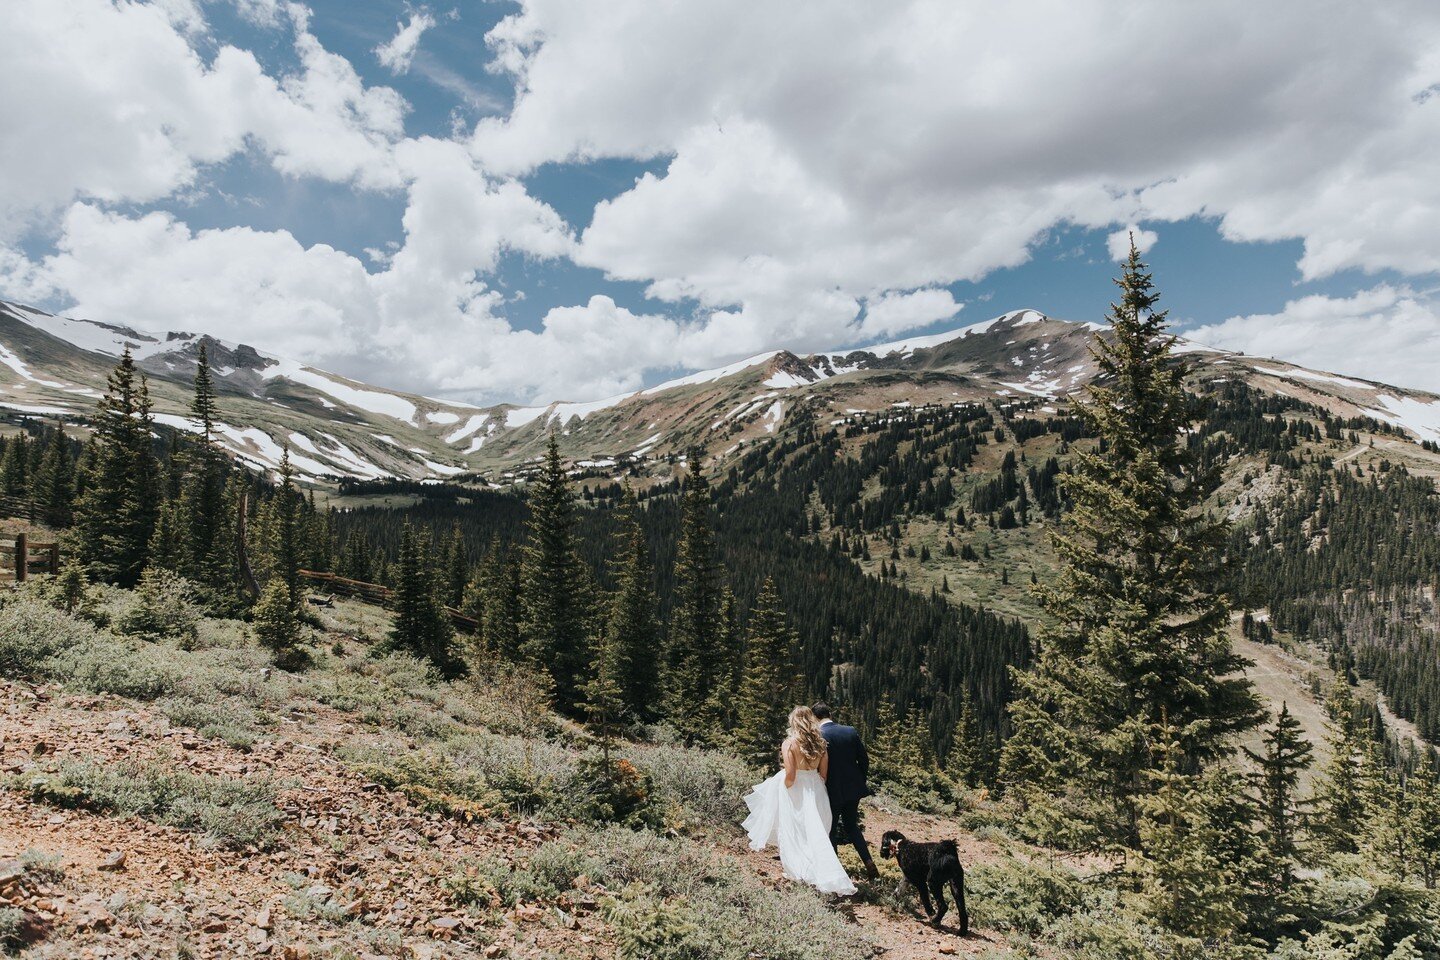 Just a casual dog walk on top of the world in wedding attire. NBD.